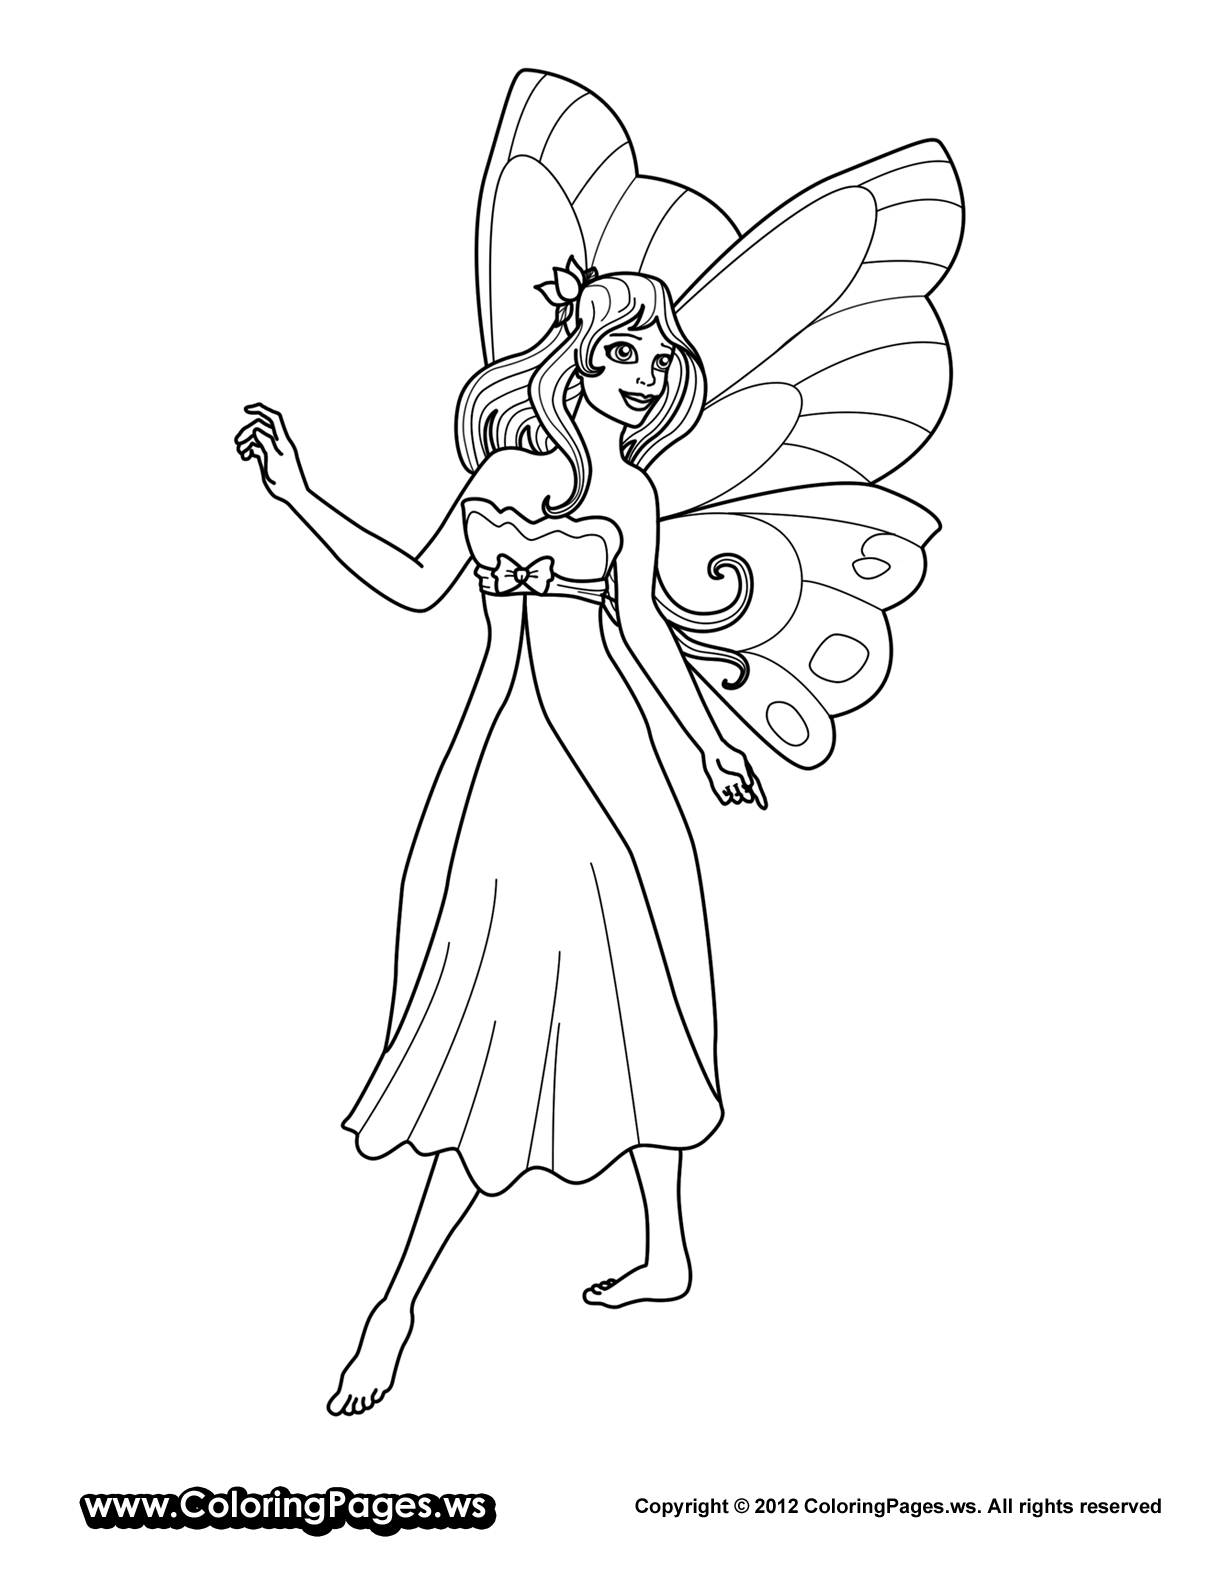 Cartoon Fairy Princess Coloring Pages for Kindergarten